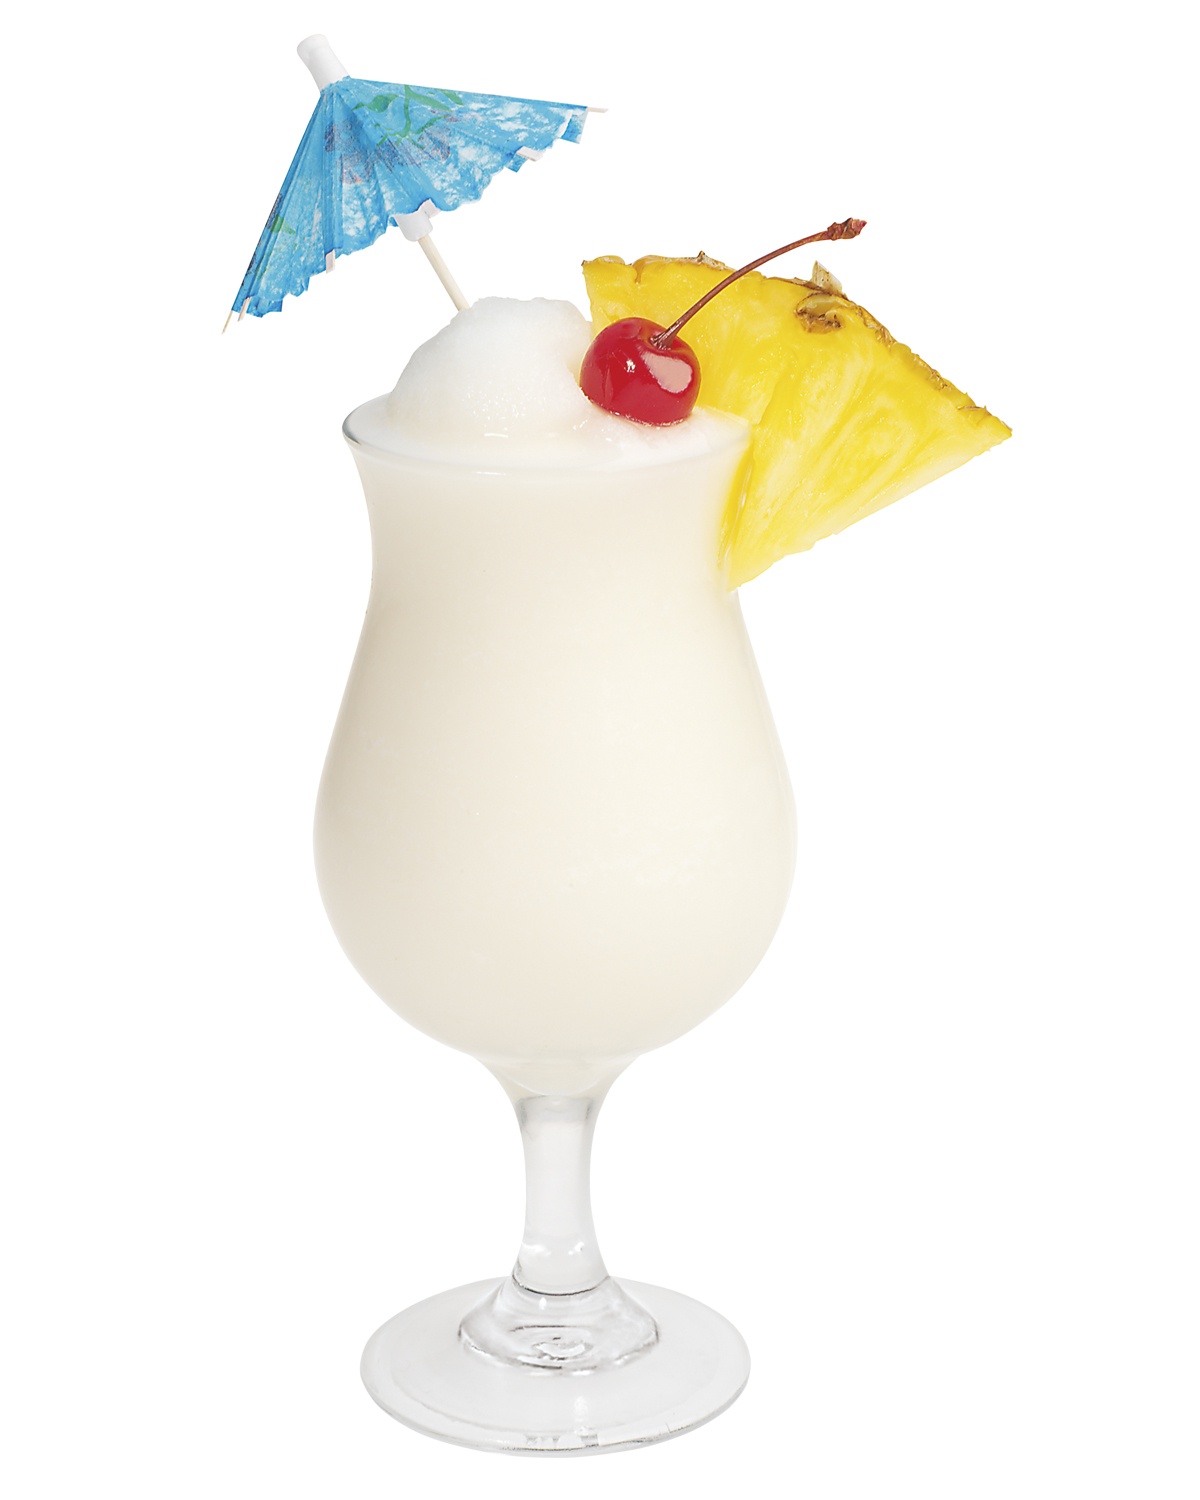 Seven Ways to Shake Up the Classic PiÃ±a Colada.